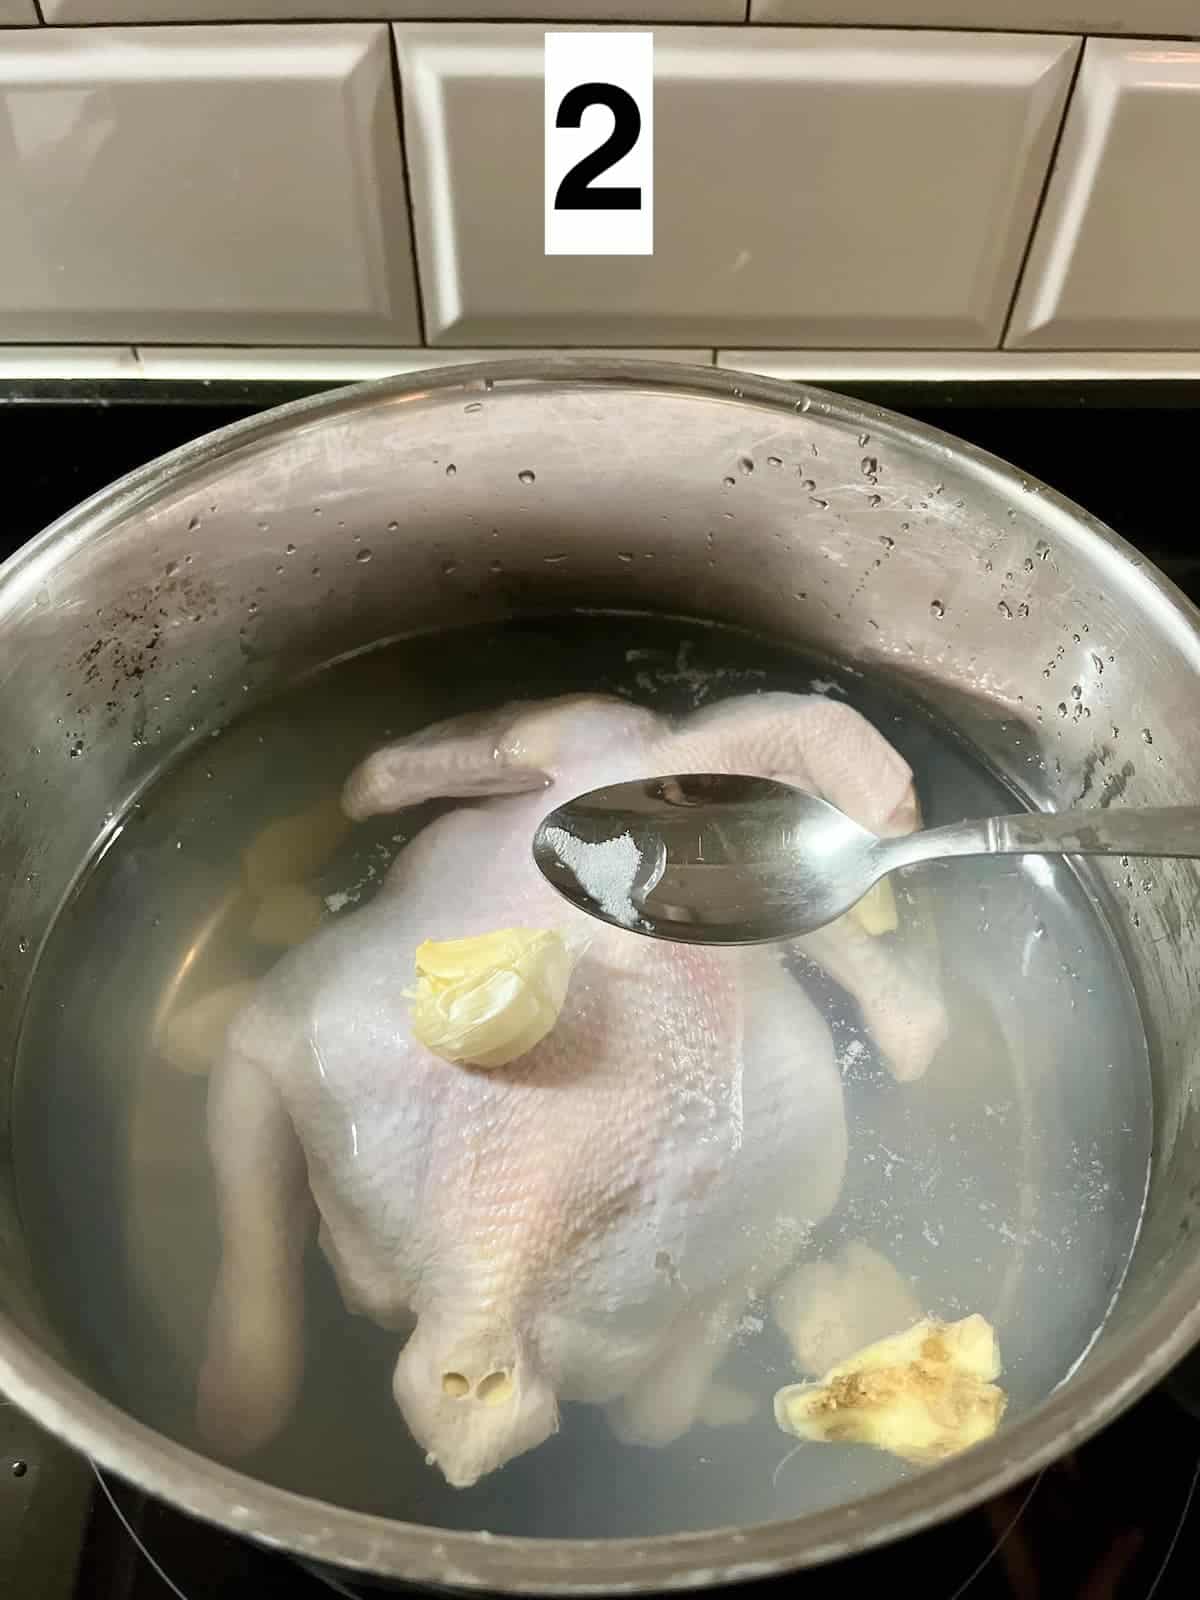 Removing white foam from the pot of chicken stock.